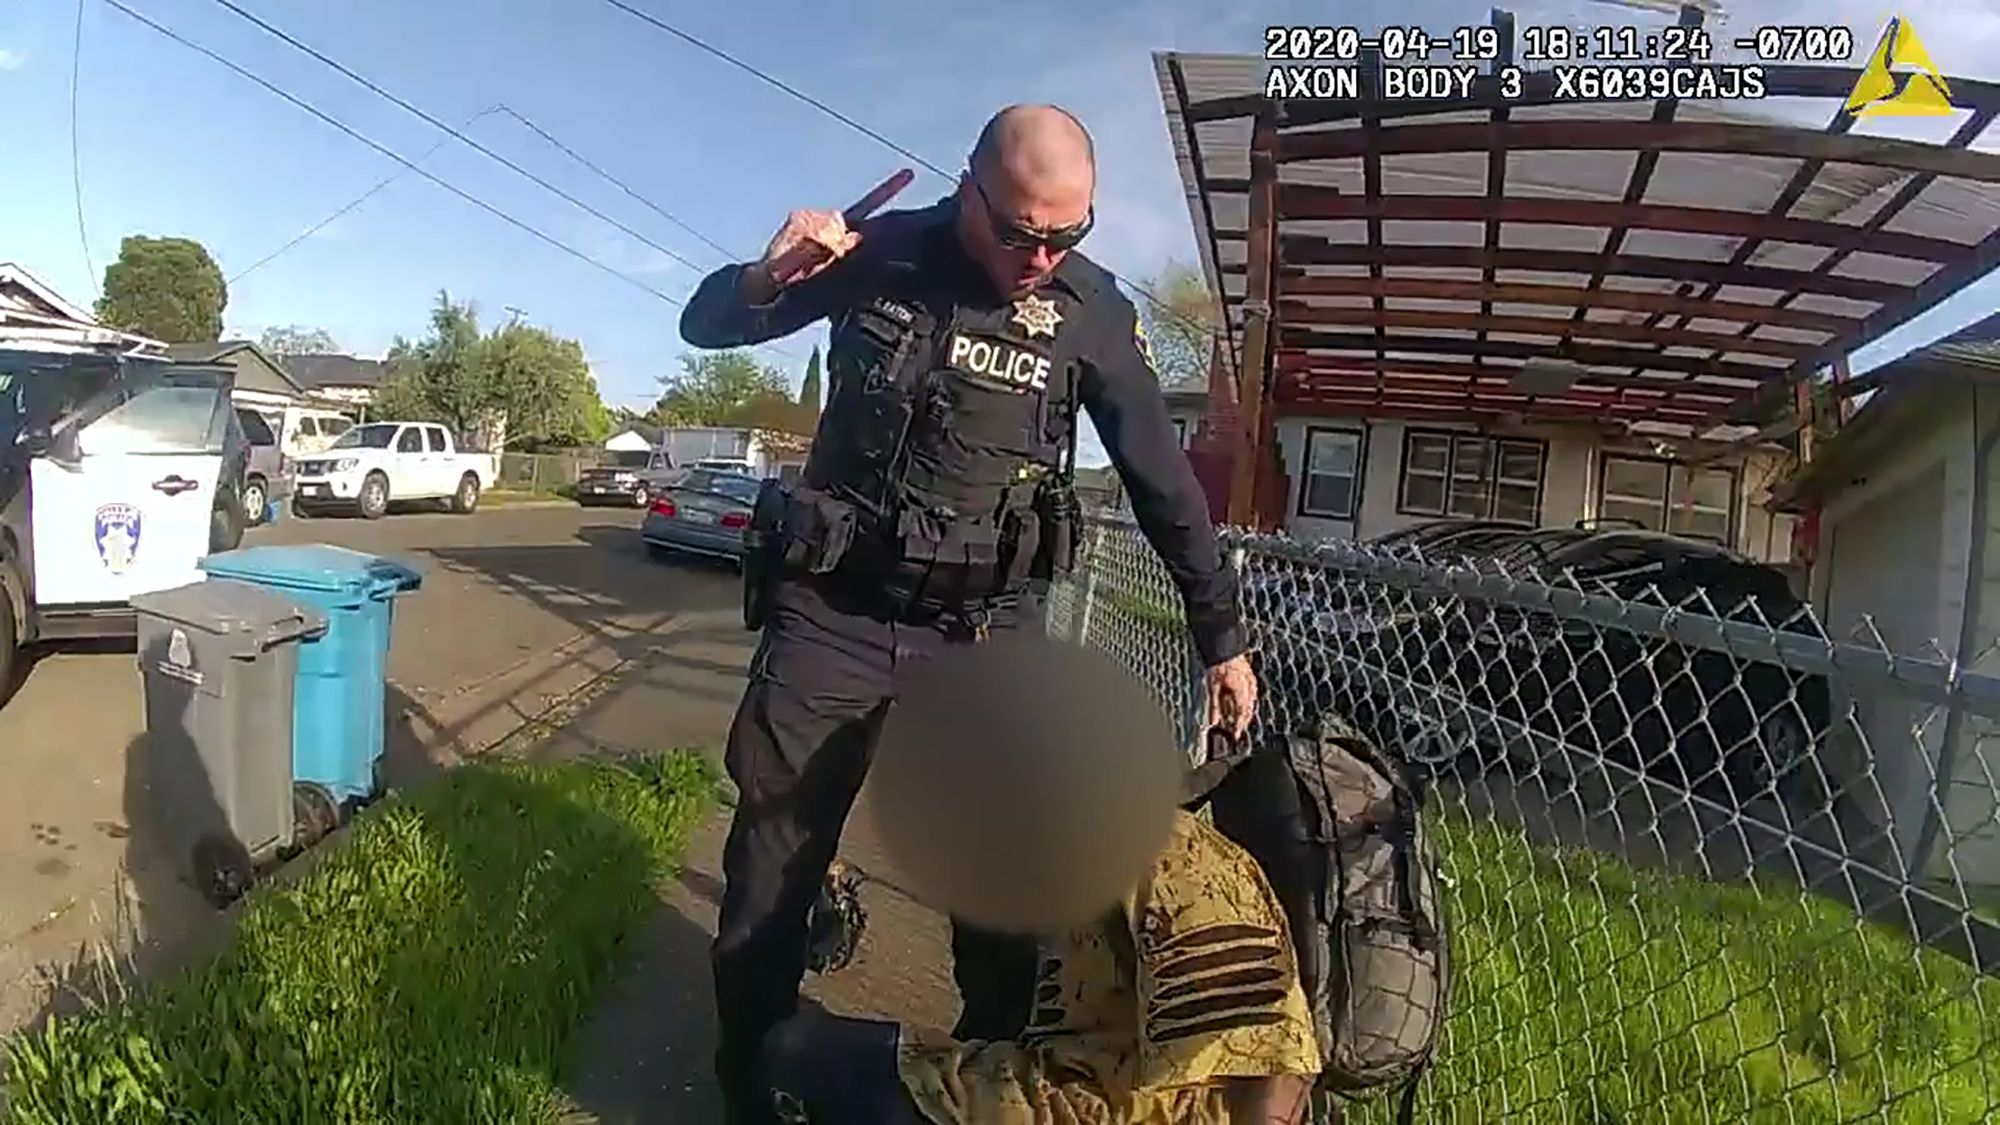 Officer Colin Eaton approaches a man reported for indecent exposure in body camera video.